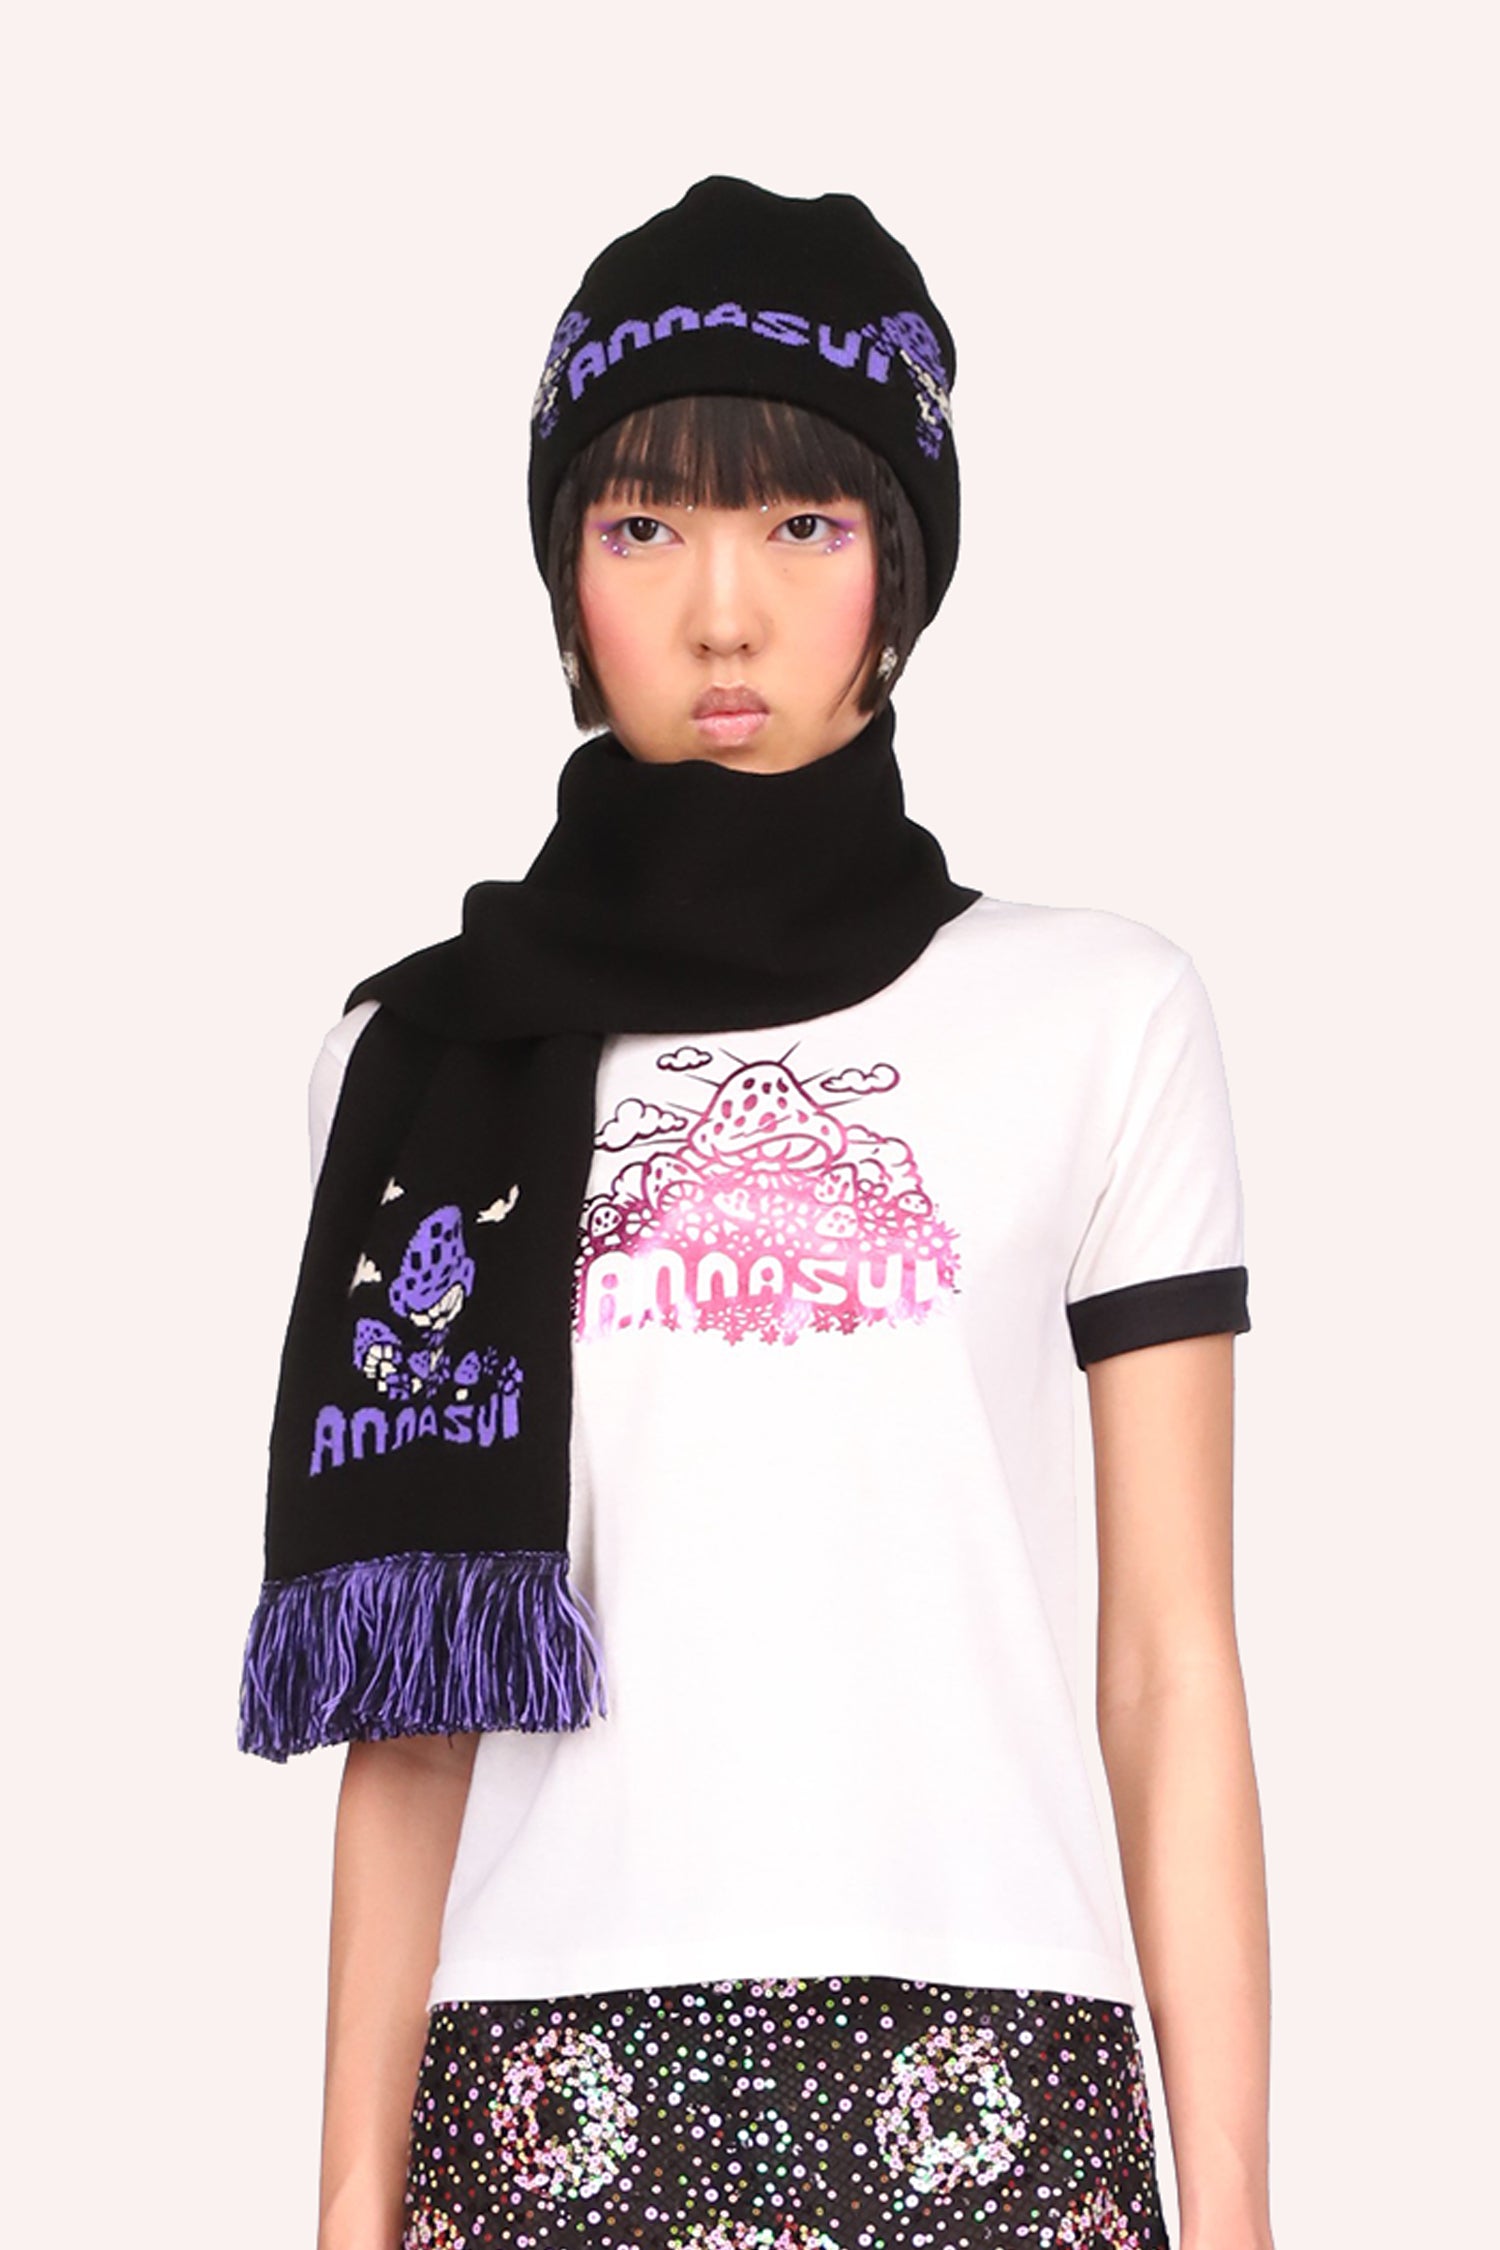 Mushroom Foil Tee, white tee, black edges on collar and arms, Anna Sui logo in pink under a large Mushroom